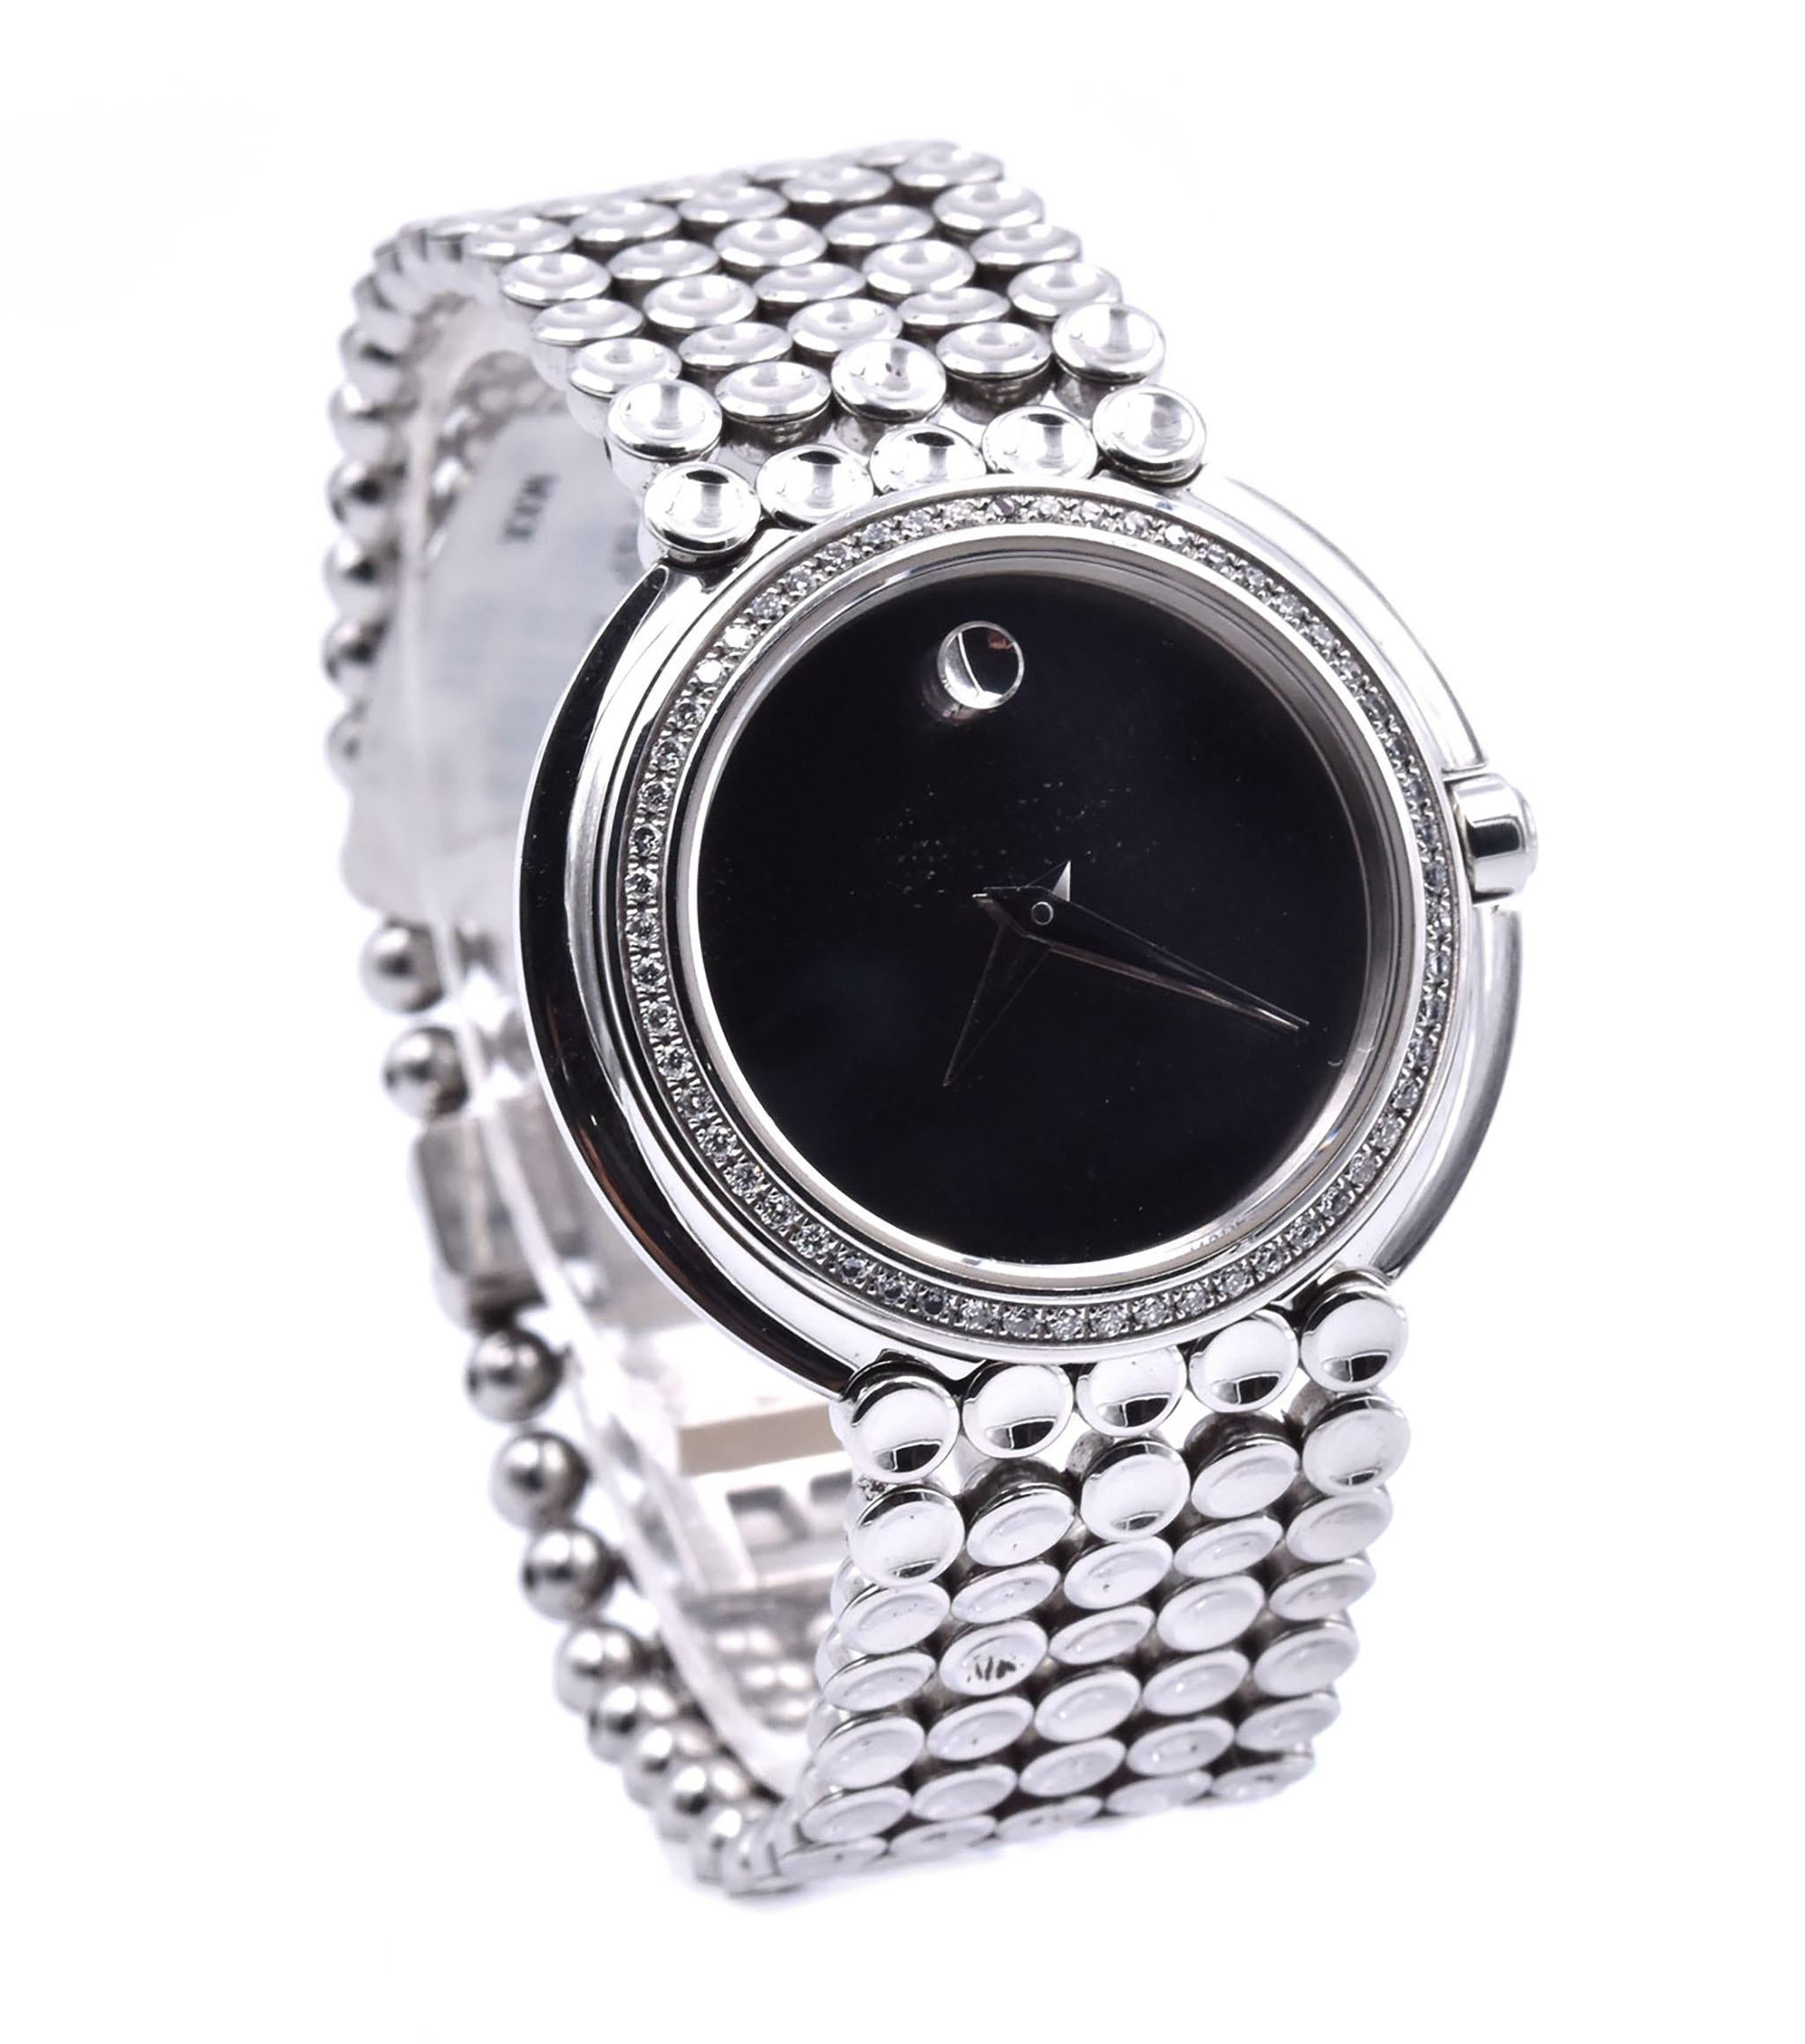 Movement: quartz
Function: hours, minutes
Case: 32mm wide case, sapphire crystal, diamond bezel
Dial: stainless dial
Bracelet: stainless steel Movado dot bracelet
Reference: 84 G4 1830
Serial: 7142XXX

No Box or Paperwork is included.
Guaranteed to